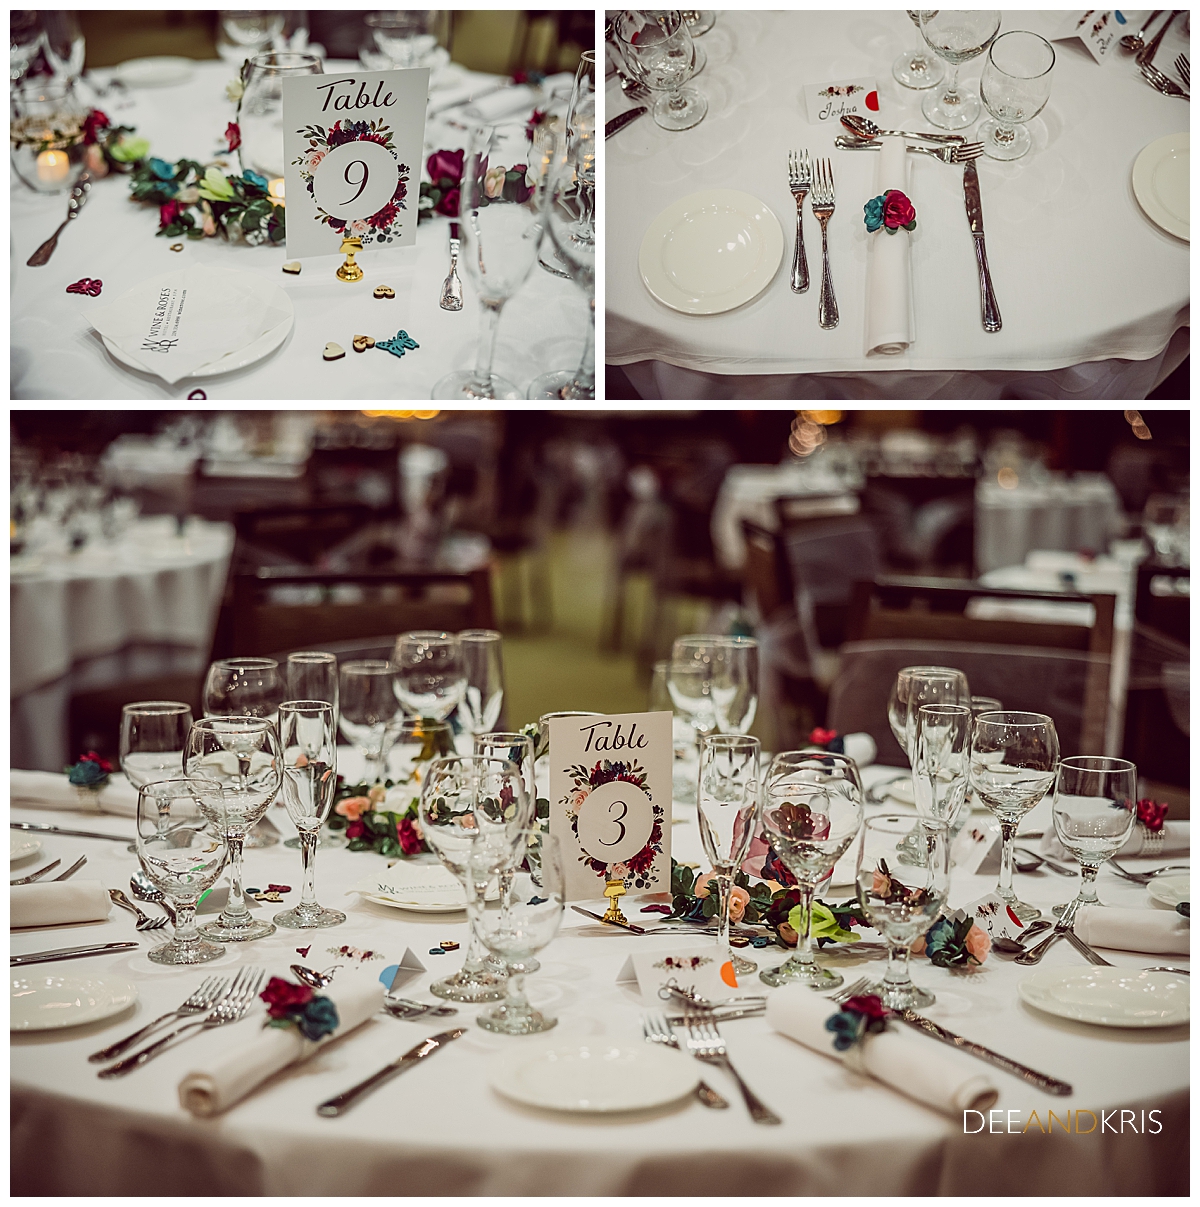 Three images: Top left image of table number sign and decorations. Top right image of place settings. Bottom image of tabletop and settings.